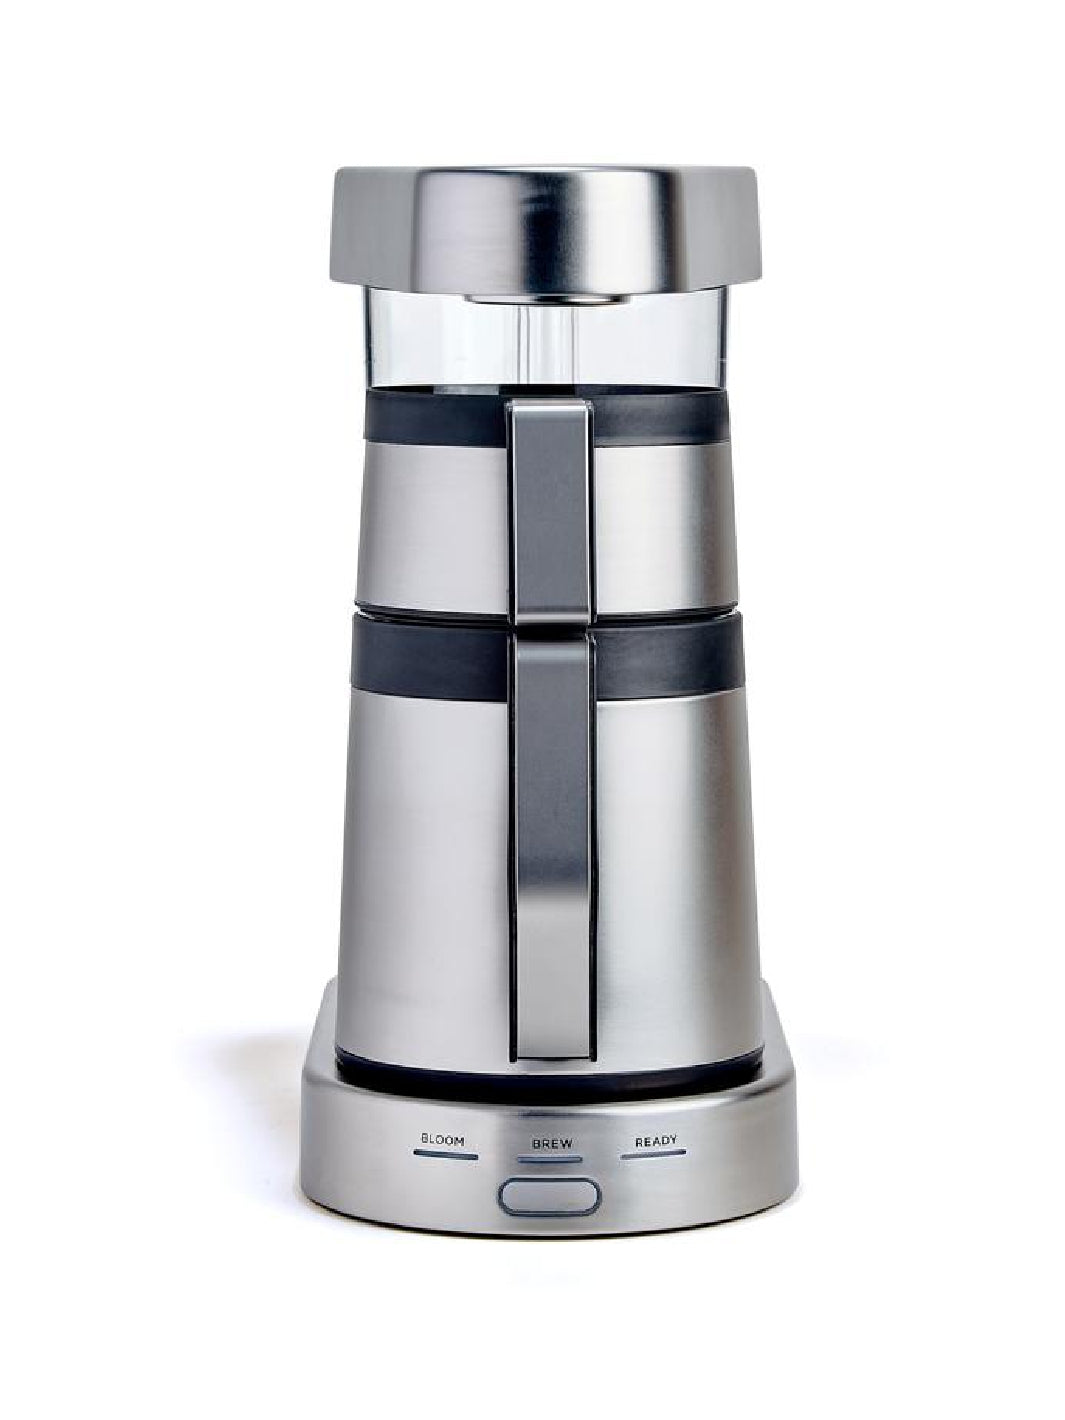 RATIO Six Coffee Maker (120V) (Stainless Steel) (Lightly Used)